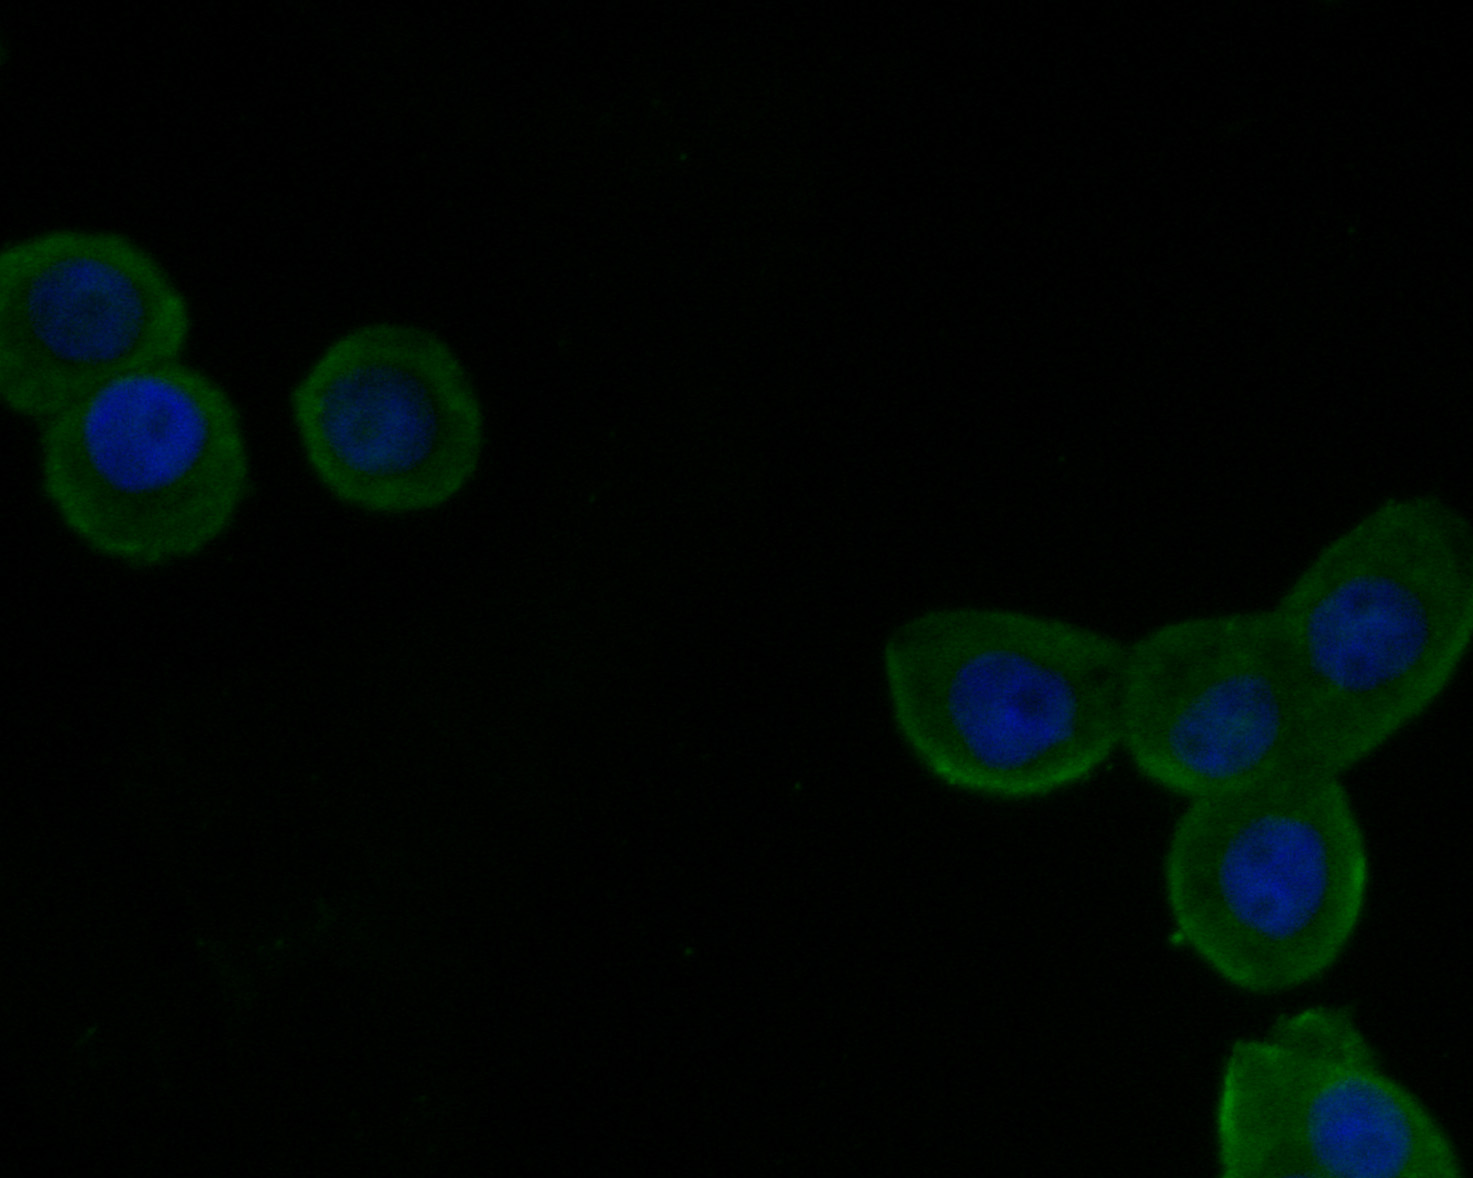 ICC staining of VLDL Receptor in LOVO cells (green). Formalin fixed cells were permeabilized with 0.1% Triton X-100 in TBS for 10 minutes at room temperature and blocked with 10% negative goat serum for 15 minutes at room temperature. Cells were probed with the primary antibody (HA500194, 1/50) for 1 hour at room temperature, washed with PBS. Alexa Fluor®488 conjugate-Goat anti-Rabbit IgG was used as the secondary antibody at 1/1,000 dilution. The nuclear counter stain is DAPI (blue).